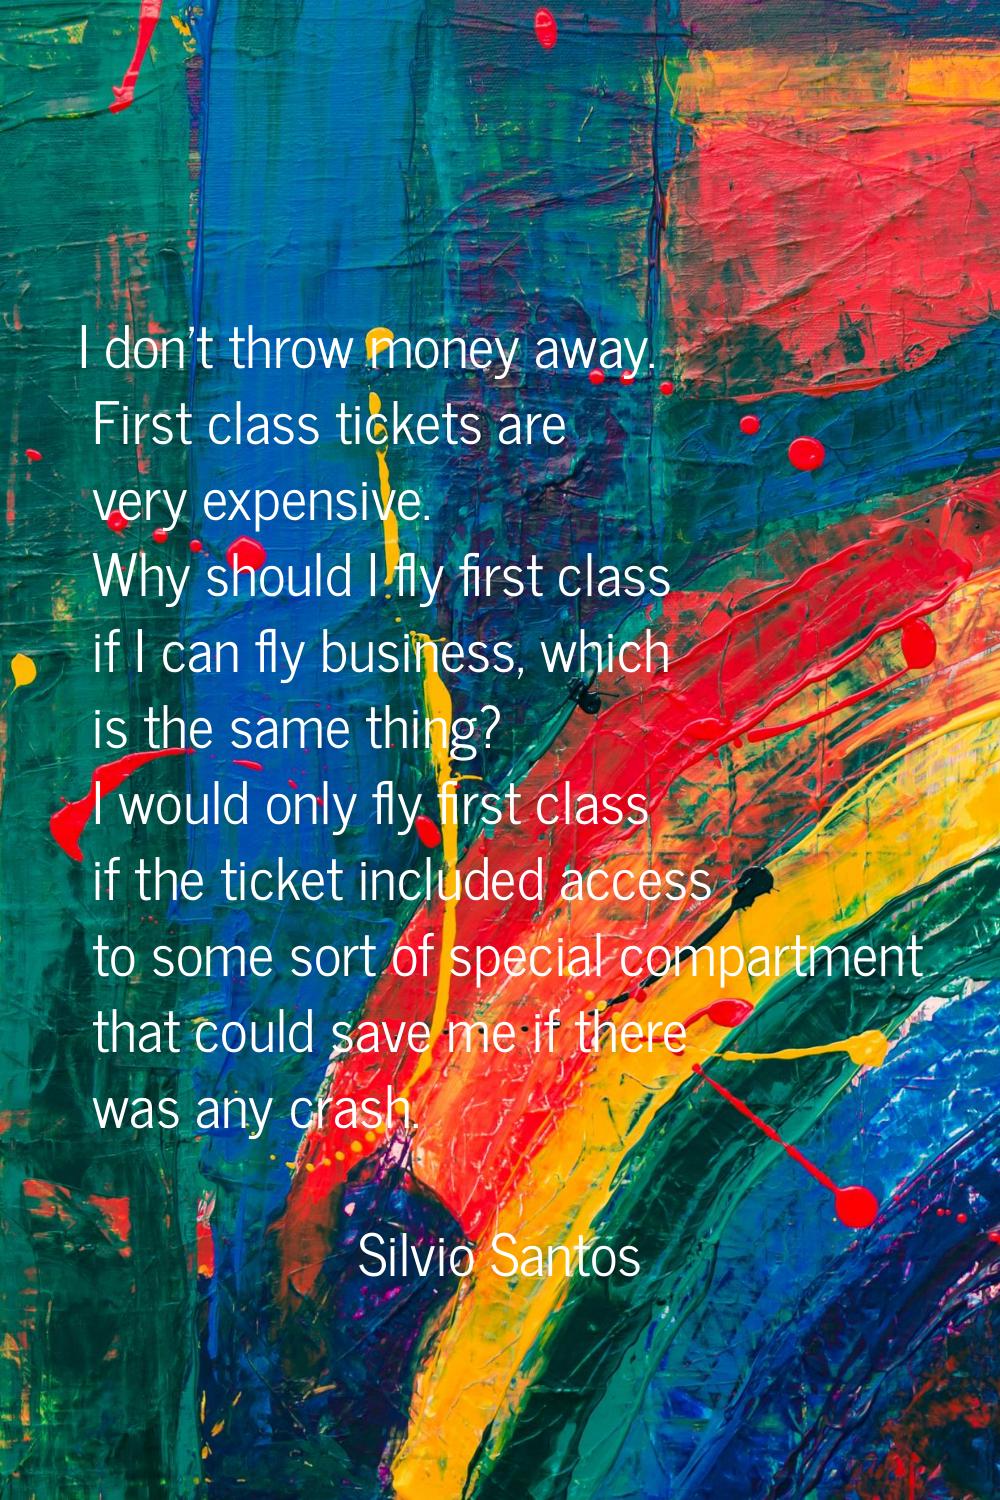 I don't throw money away. First class tickets are very expensive. Why should I fly first class if I